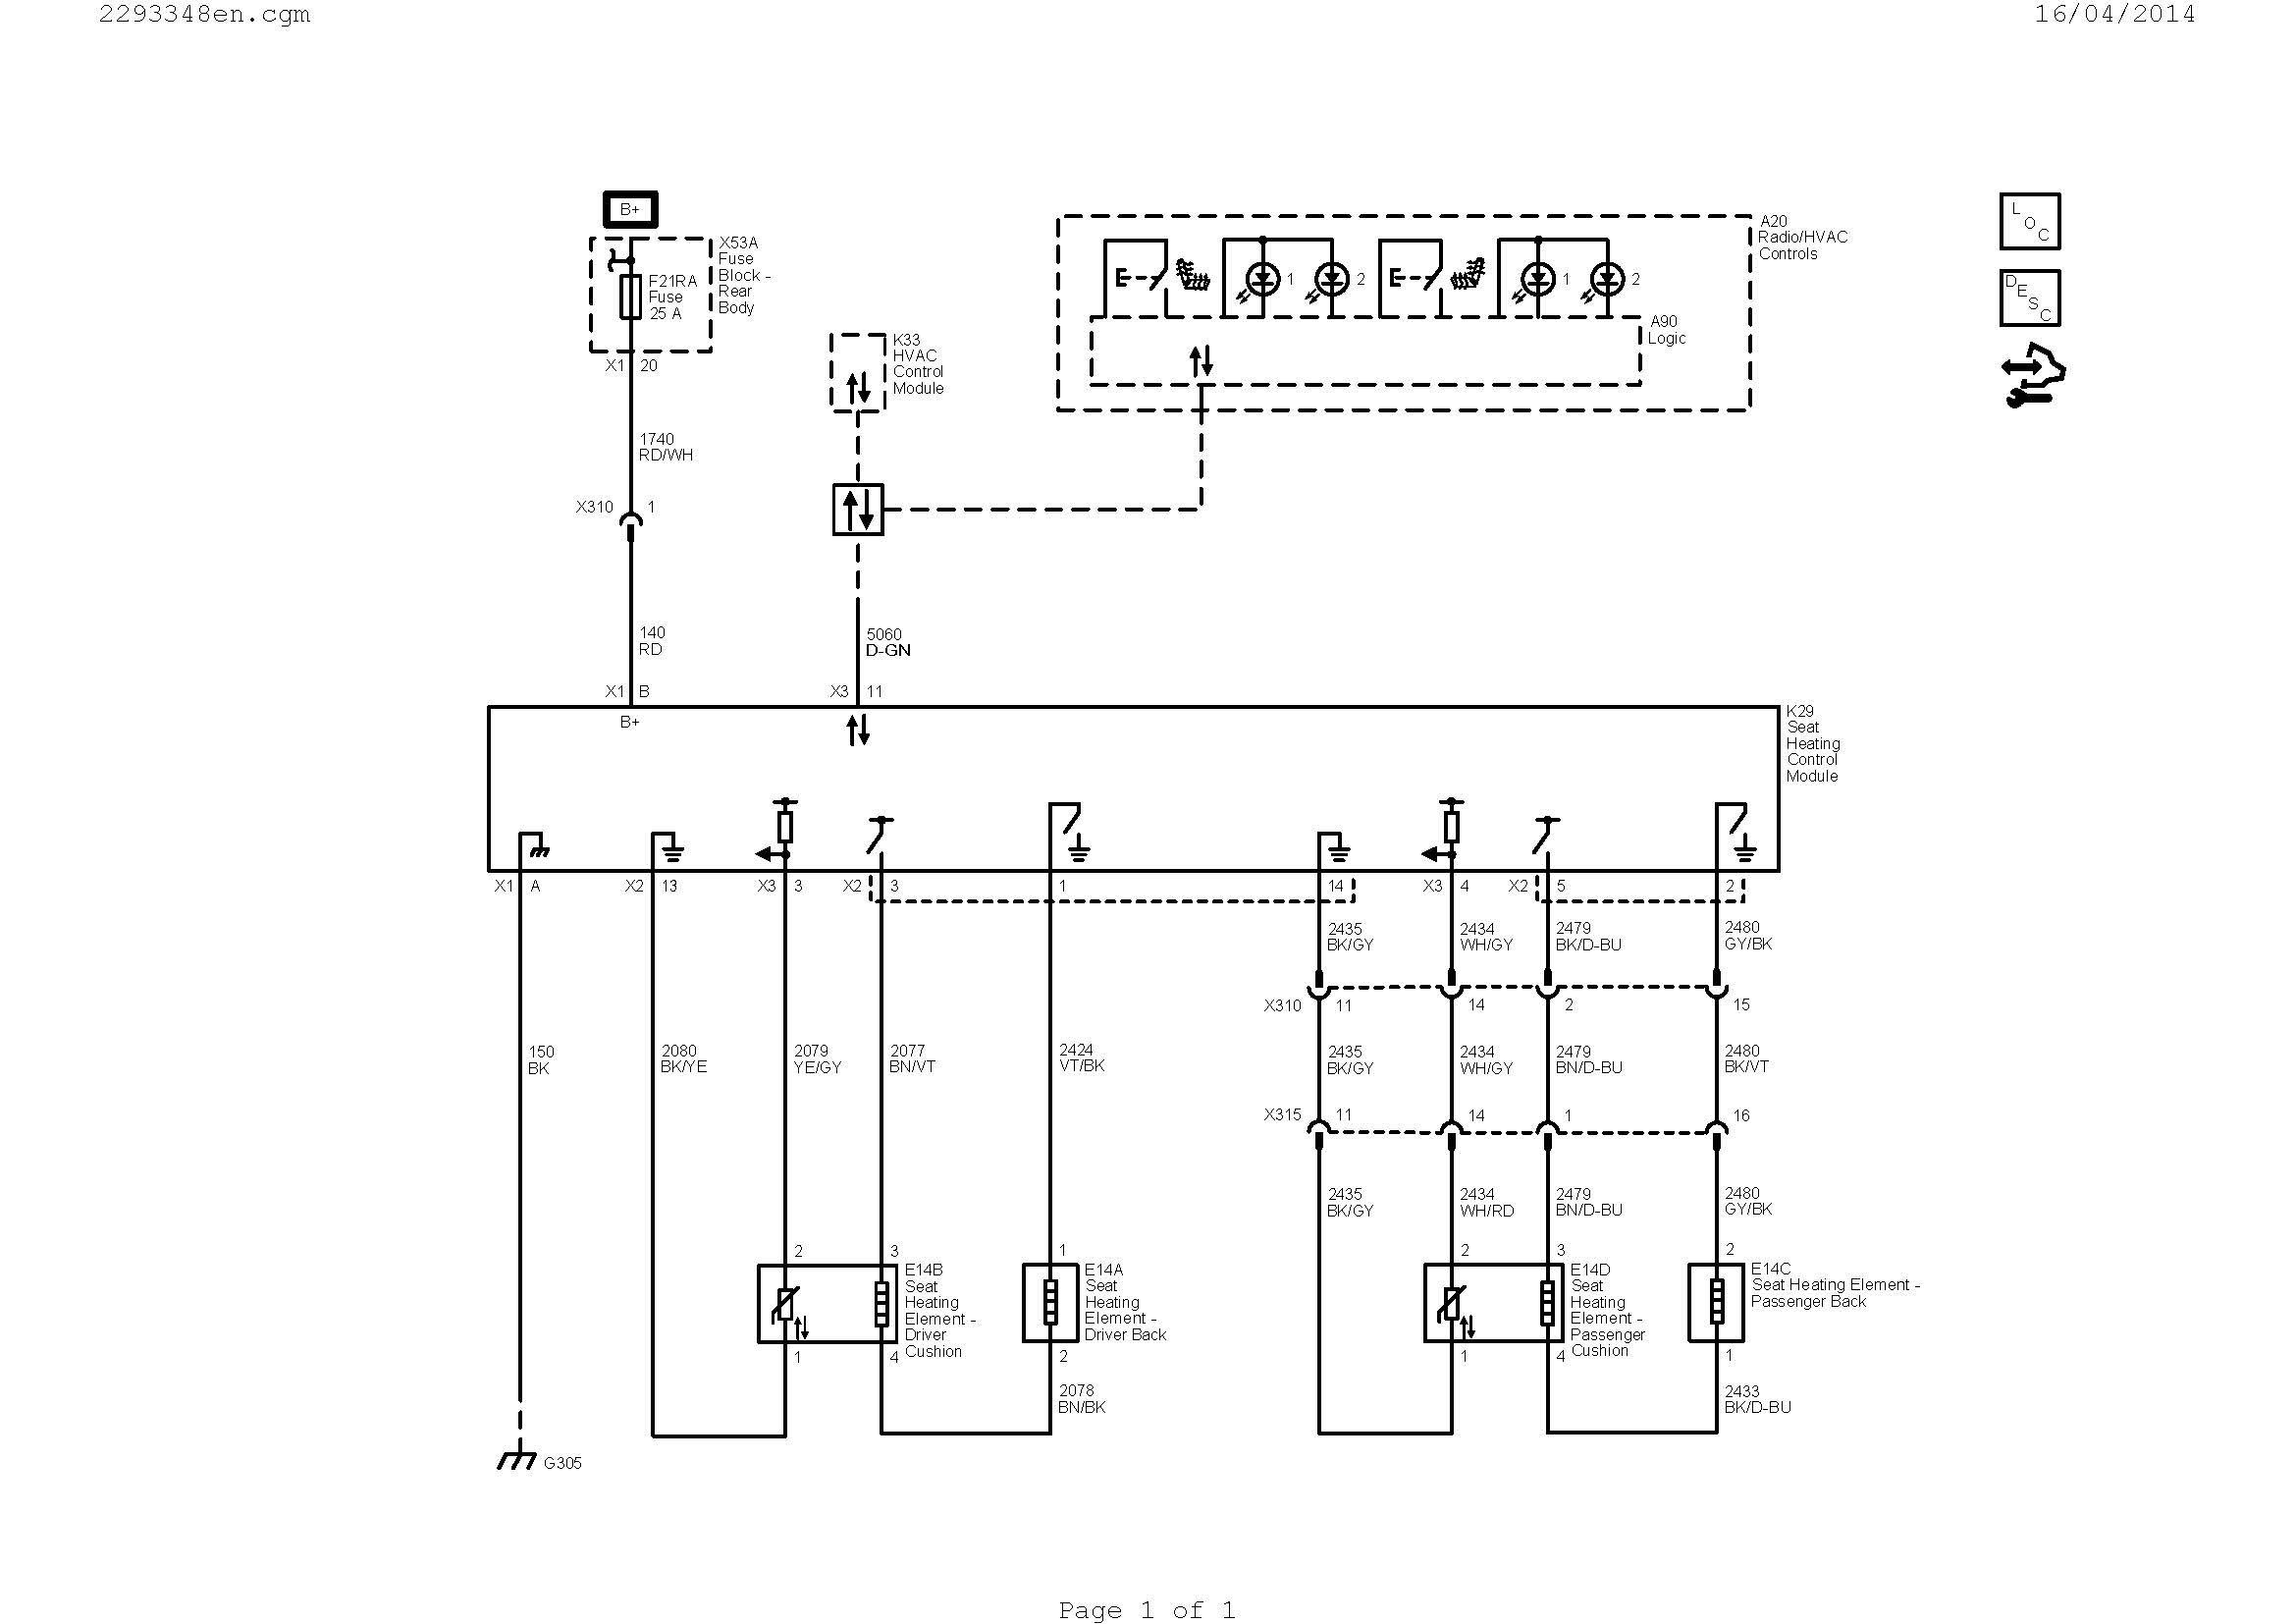 Wiring Diagram for Furnace with Ac Best Furnace Parts Diagram New Hvac Diagram Best Hvac Diagram